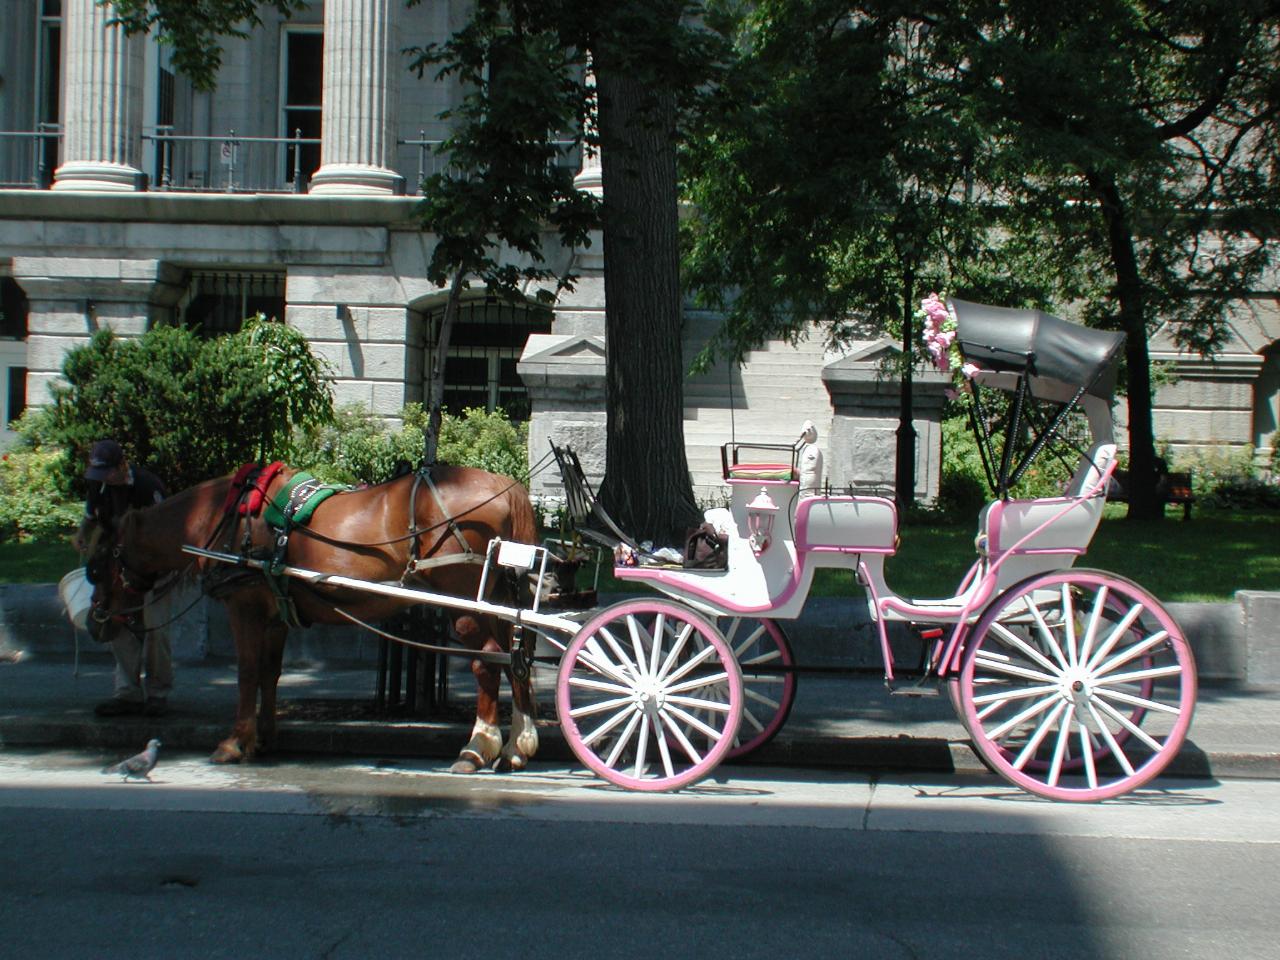 More horse drwan tours in front of Montreal City Hall